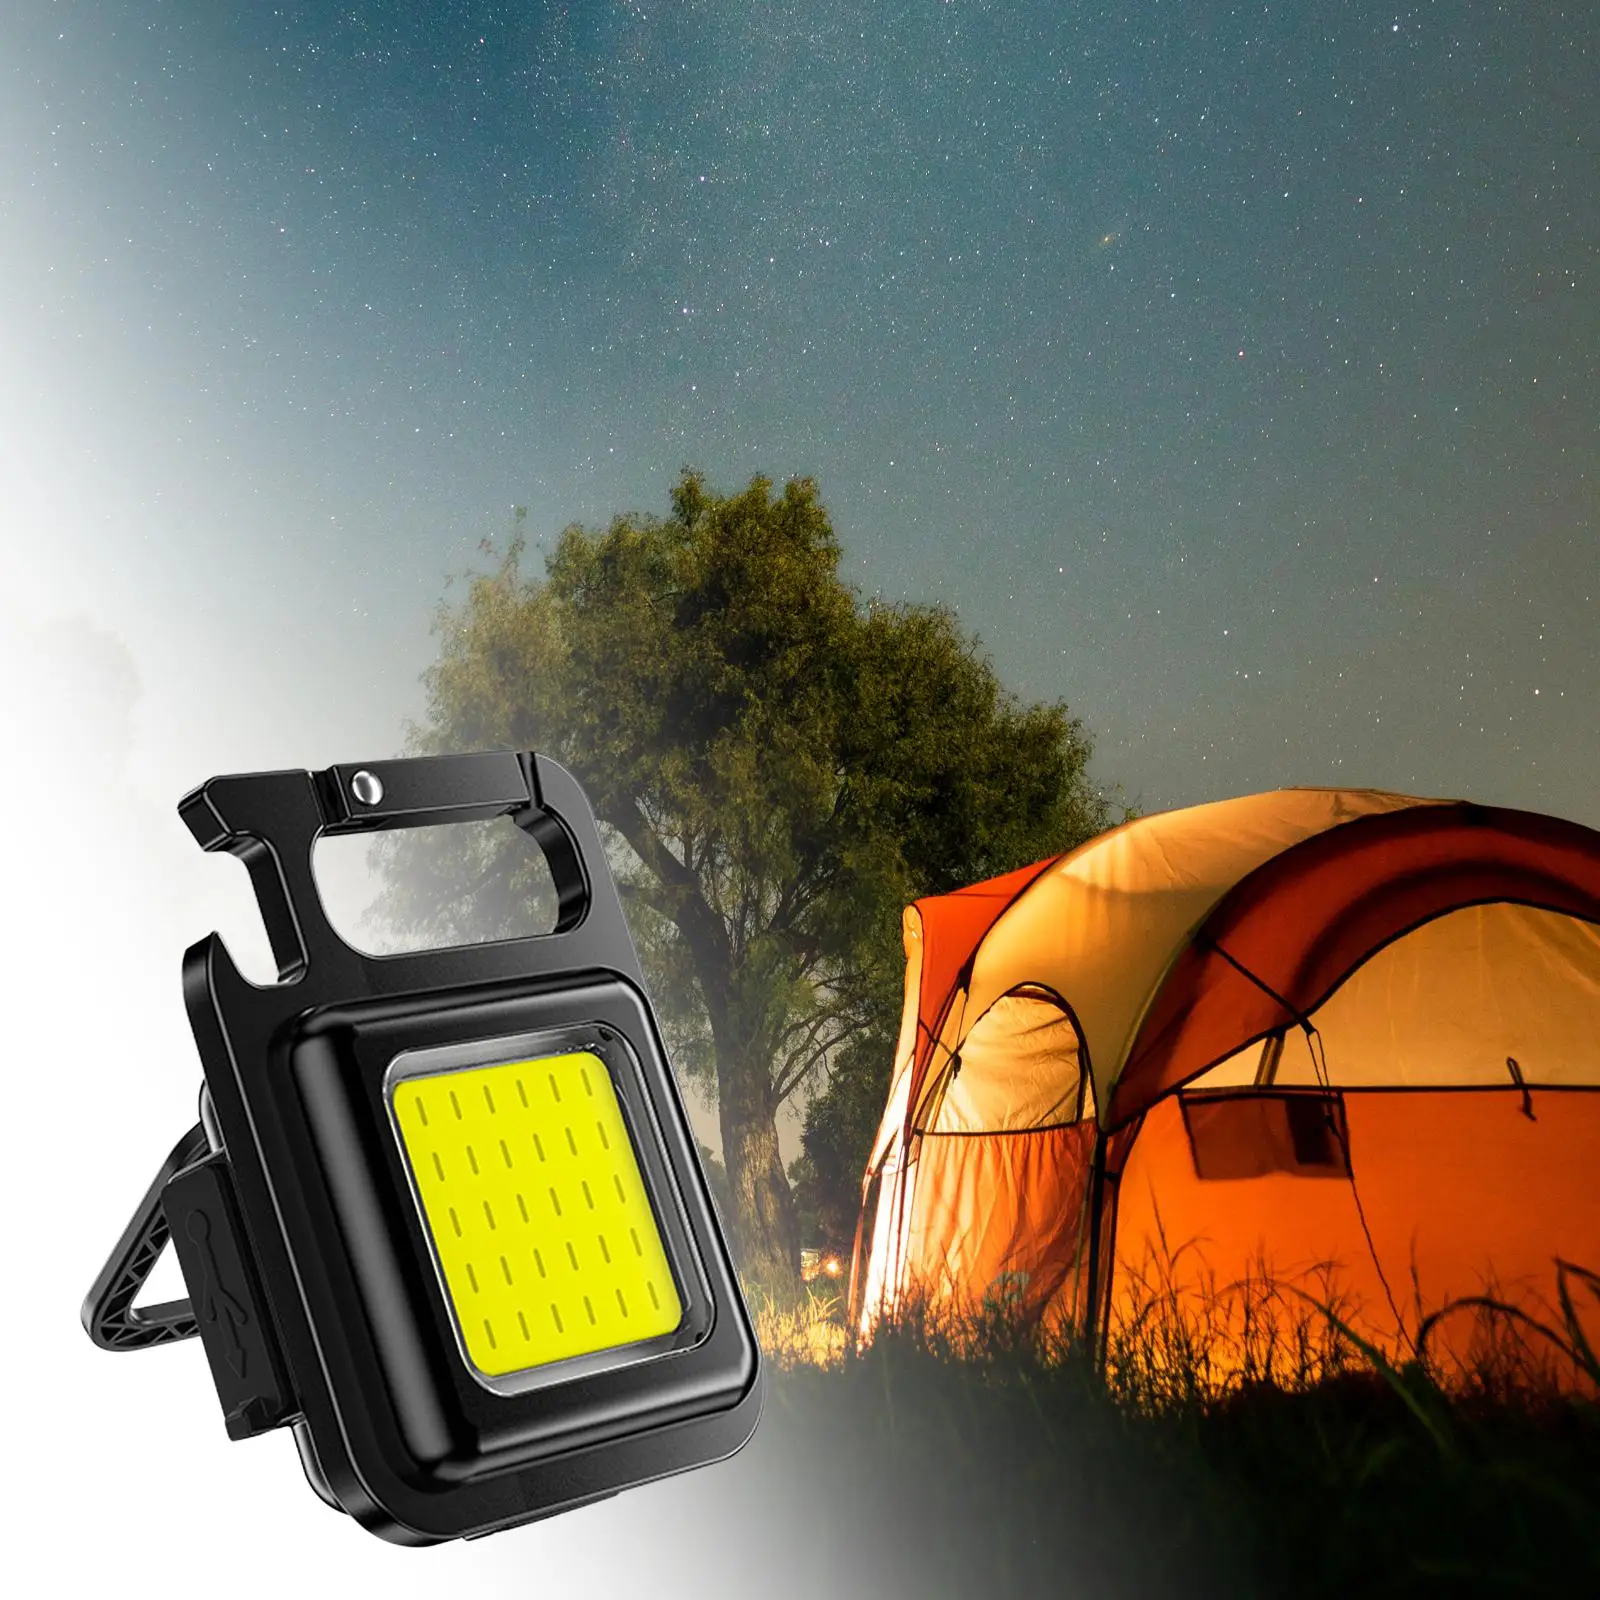 Portable COB Keychain Flashlight USB Rechargeable Lamp Waterproof Torch Emergency Light for Fishing Walking Outdoor Work Hiking